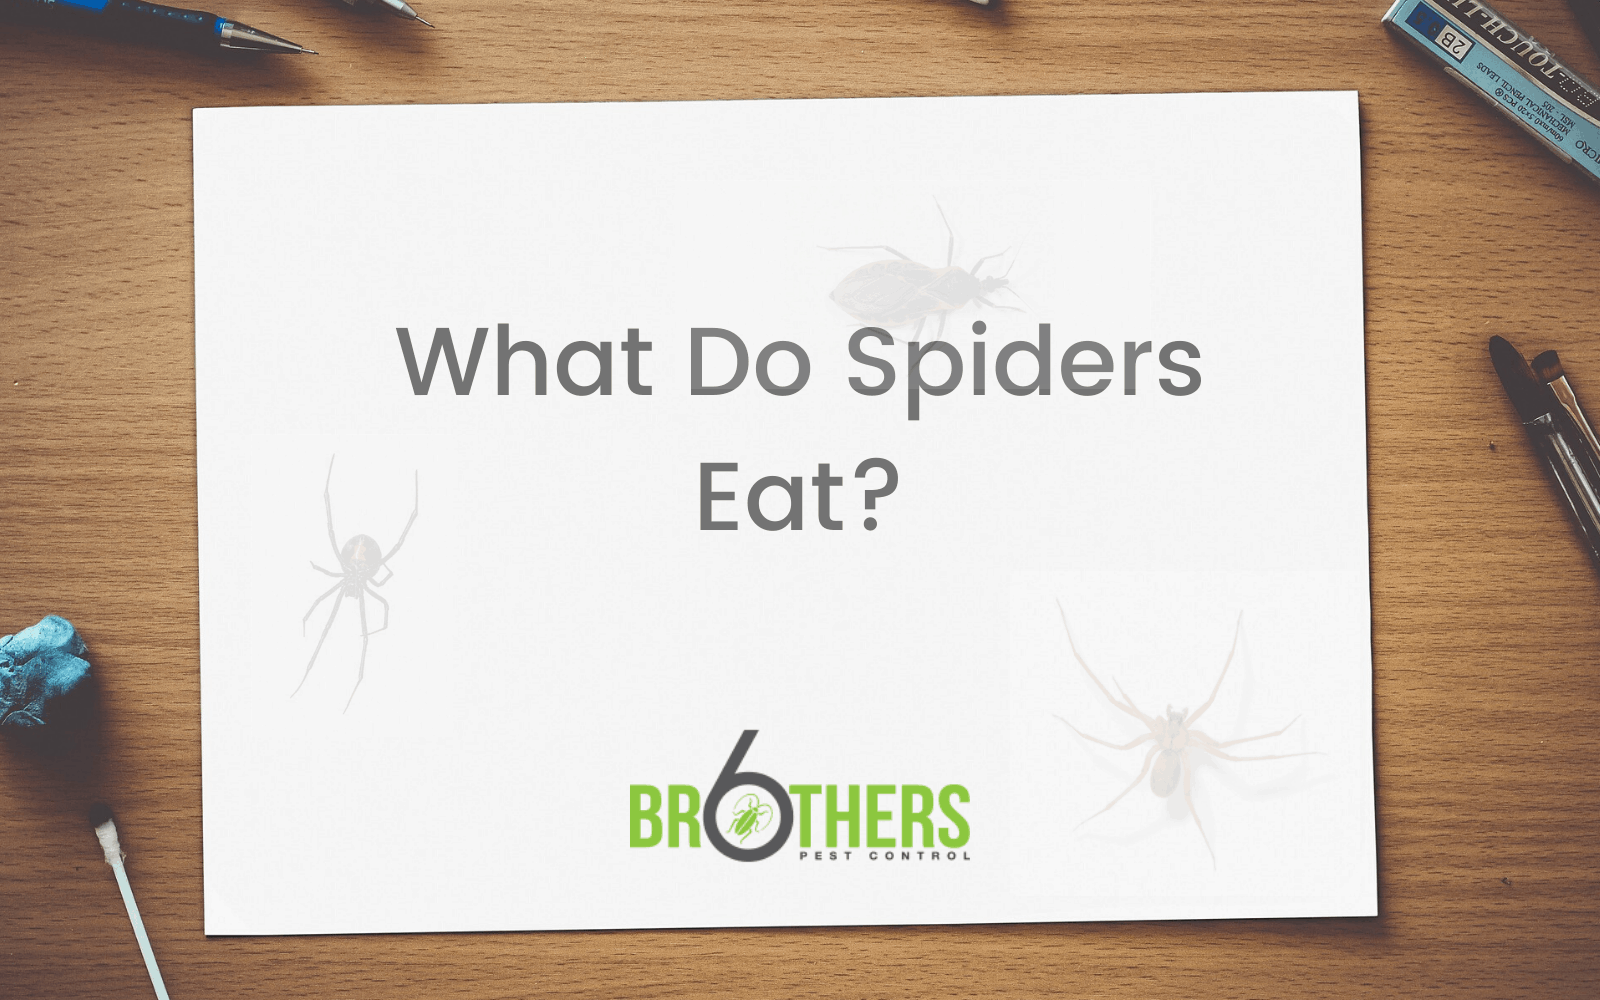 What Do Spiders Eat?